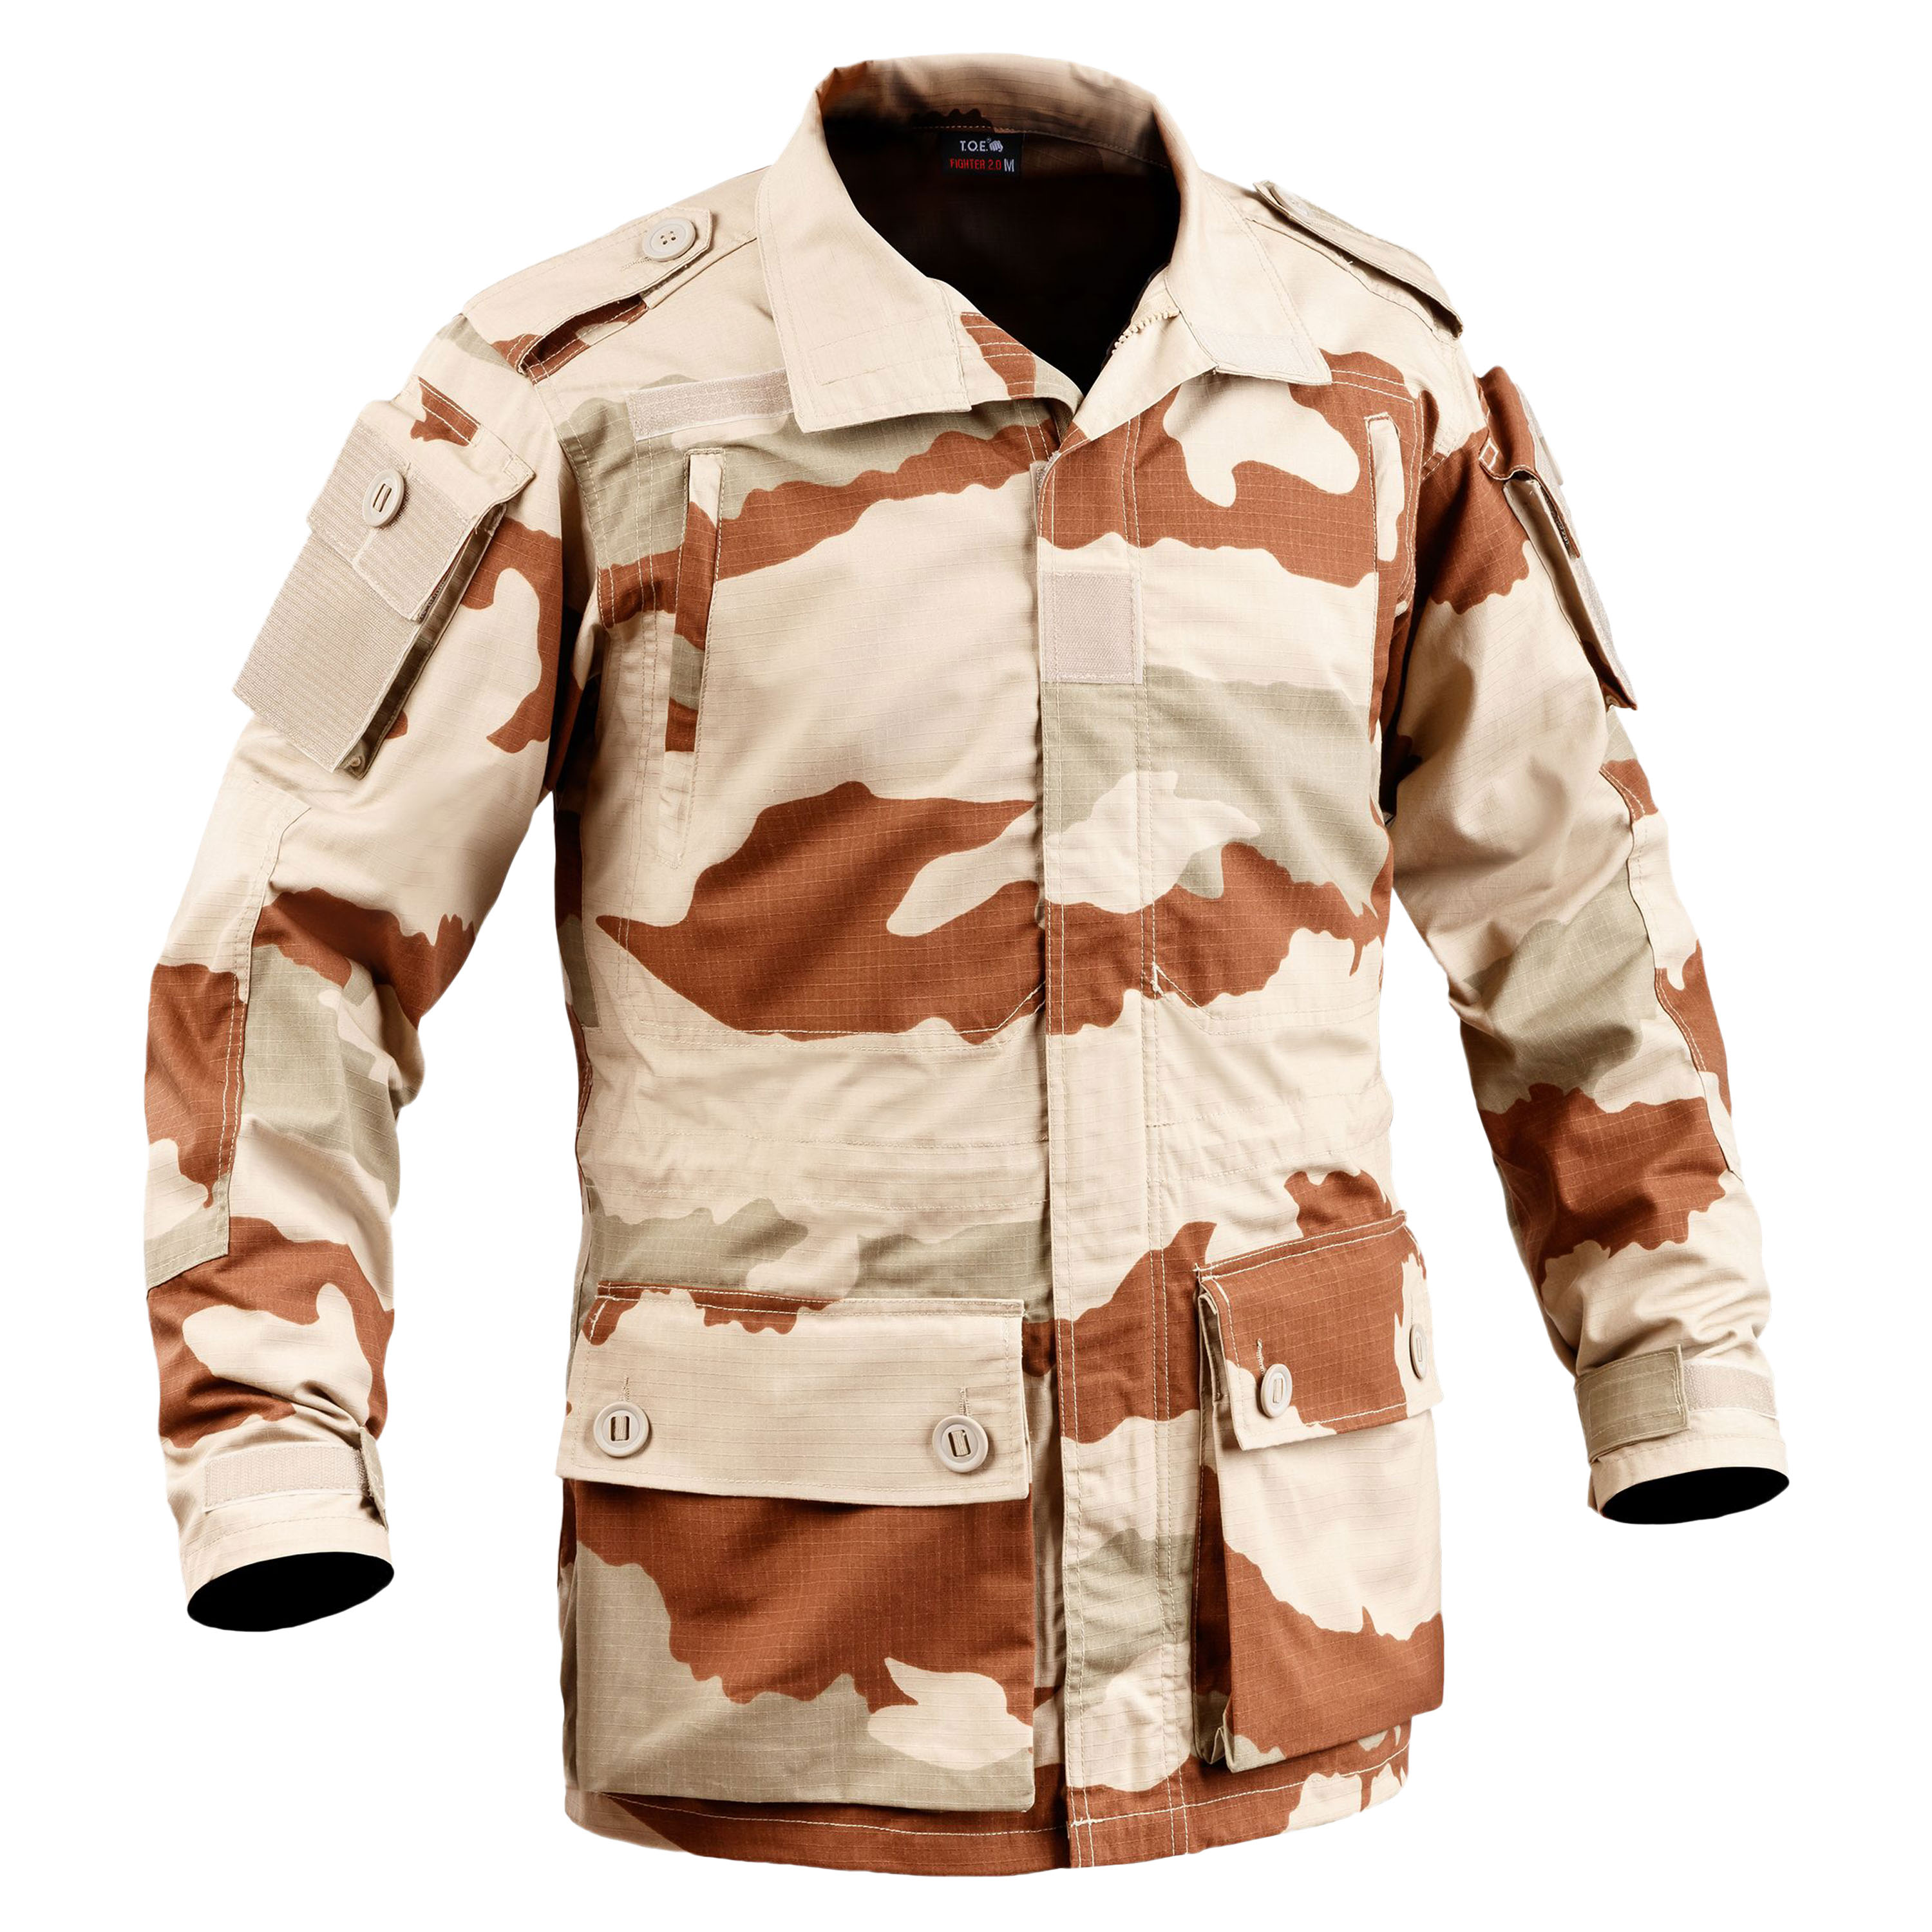 Purchase the A10 Equipment Combat Jacket Fighter 2.0 desert camo